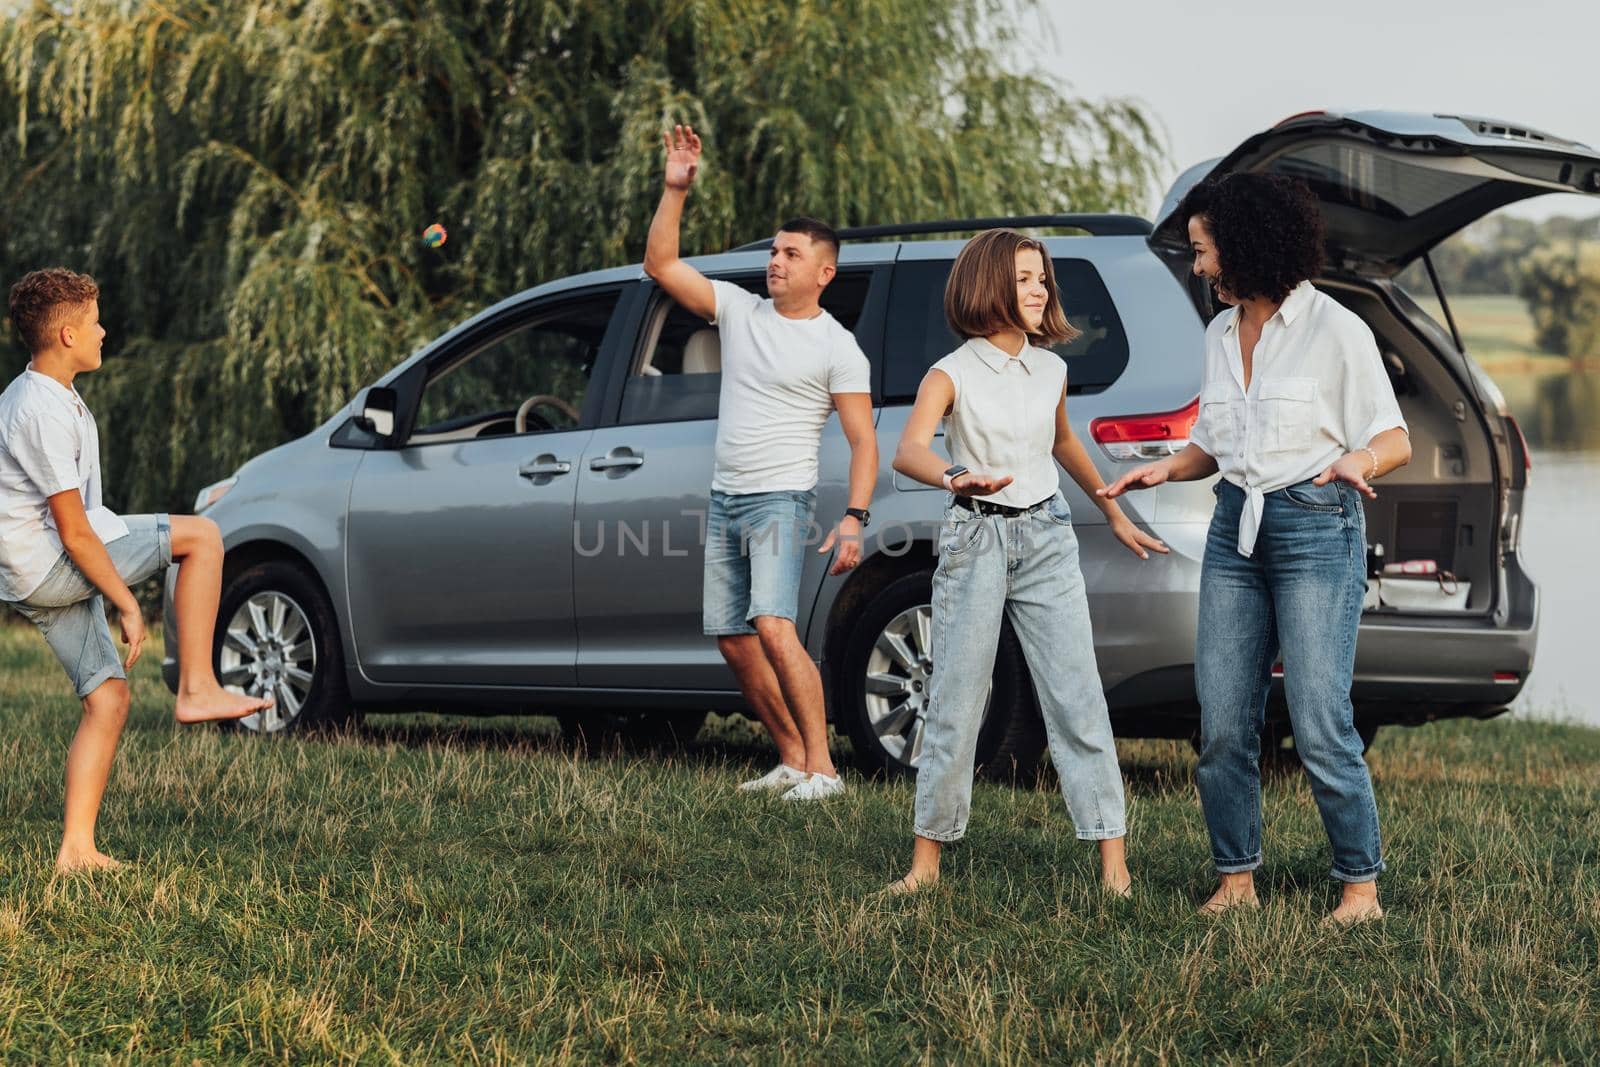 Happy Four Members Family Having Fun Time Outdoors, Mother Dancing with Teenage Daughter While Father Playing with Son, Minivan Car on Background